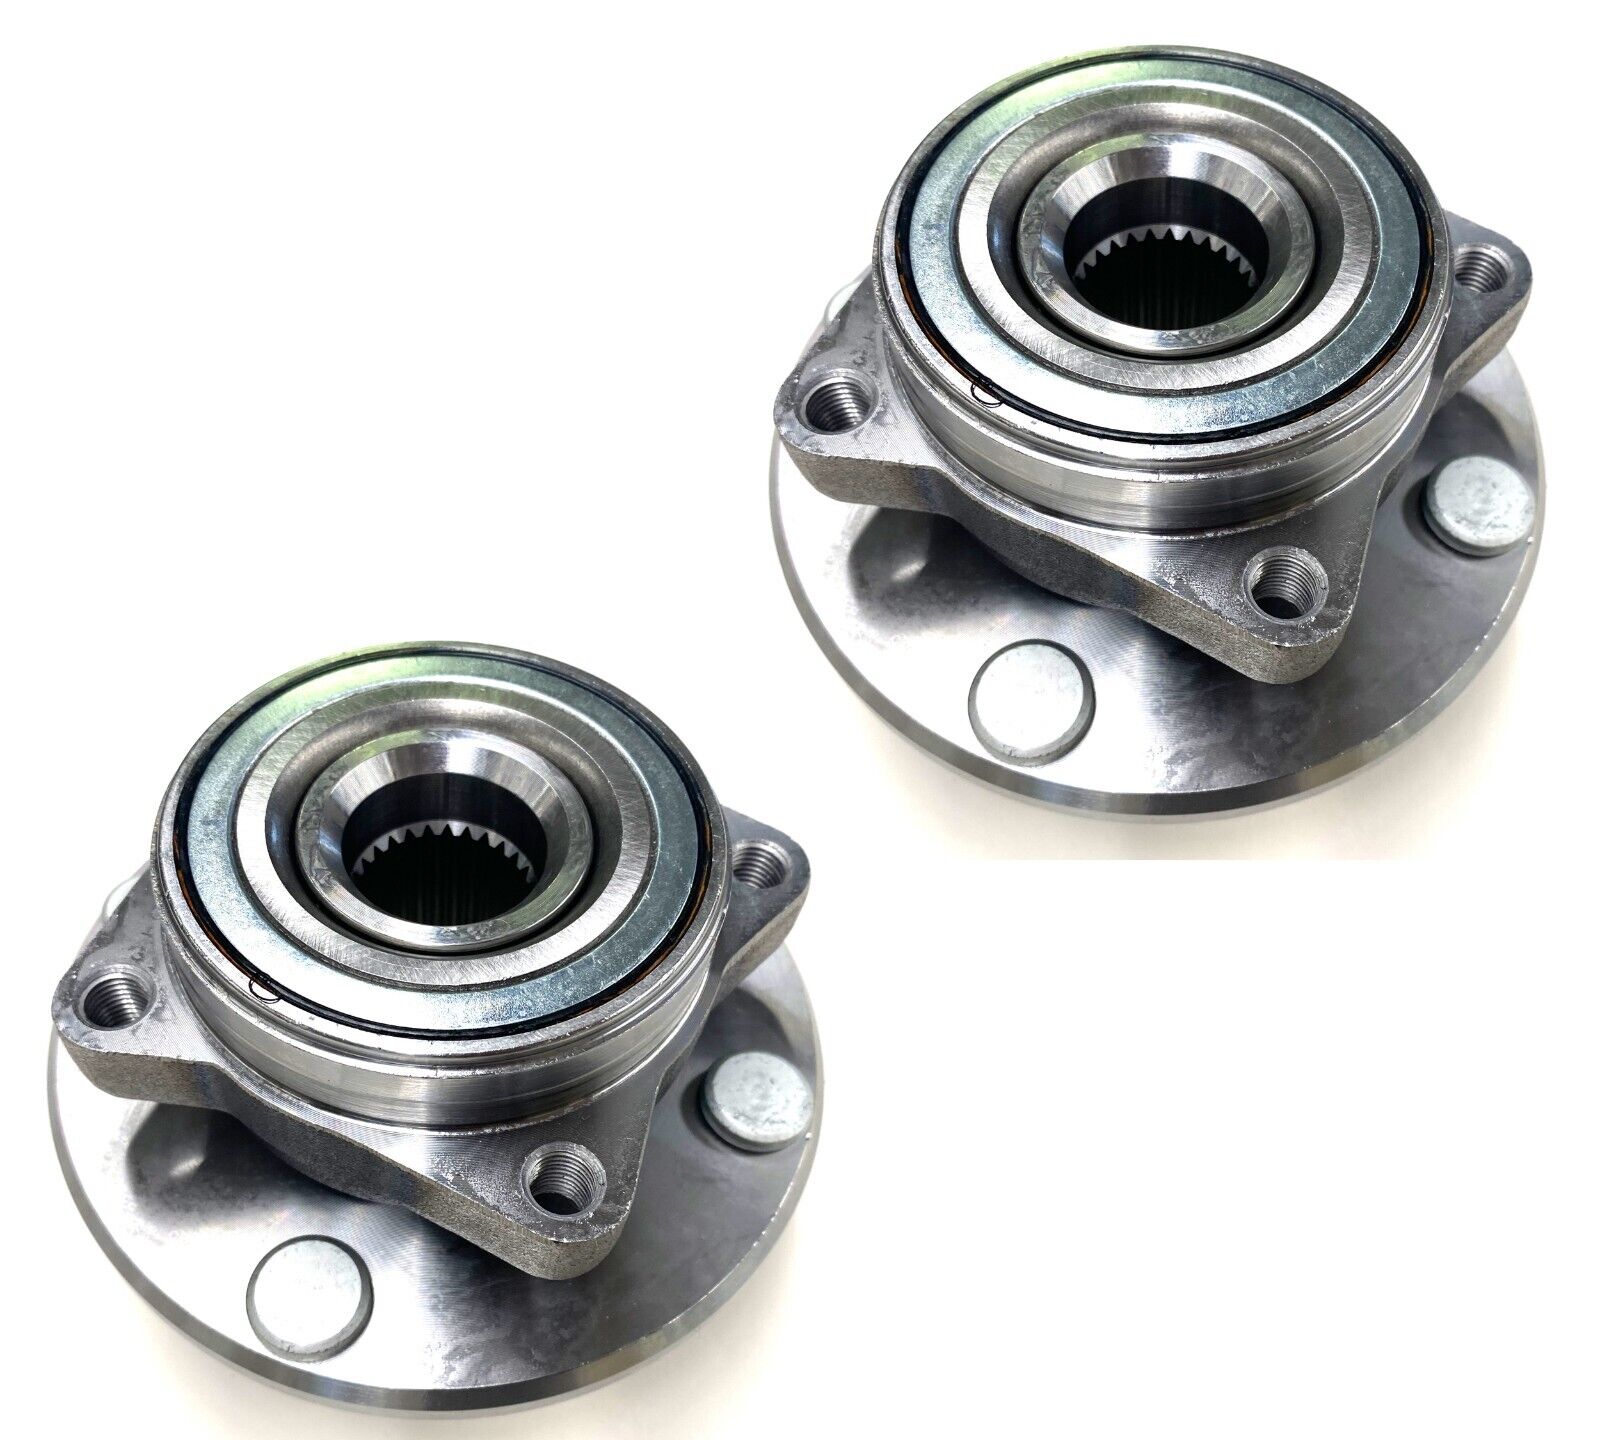 2 Front Wheel Hub Bearing FULL Assemblies Fit 1998 1999 Acura CL 2.3L 4cyl